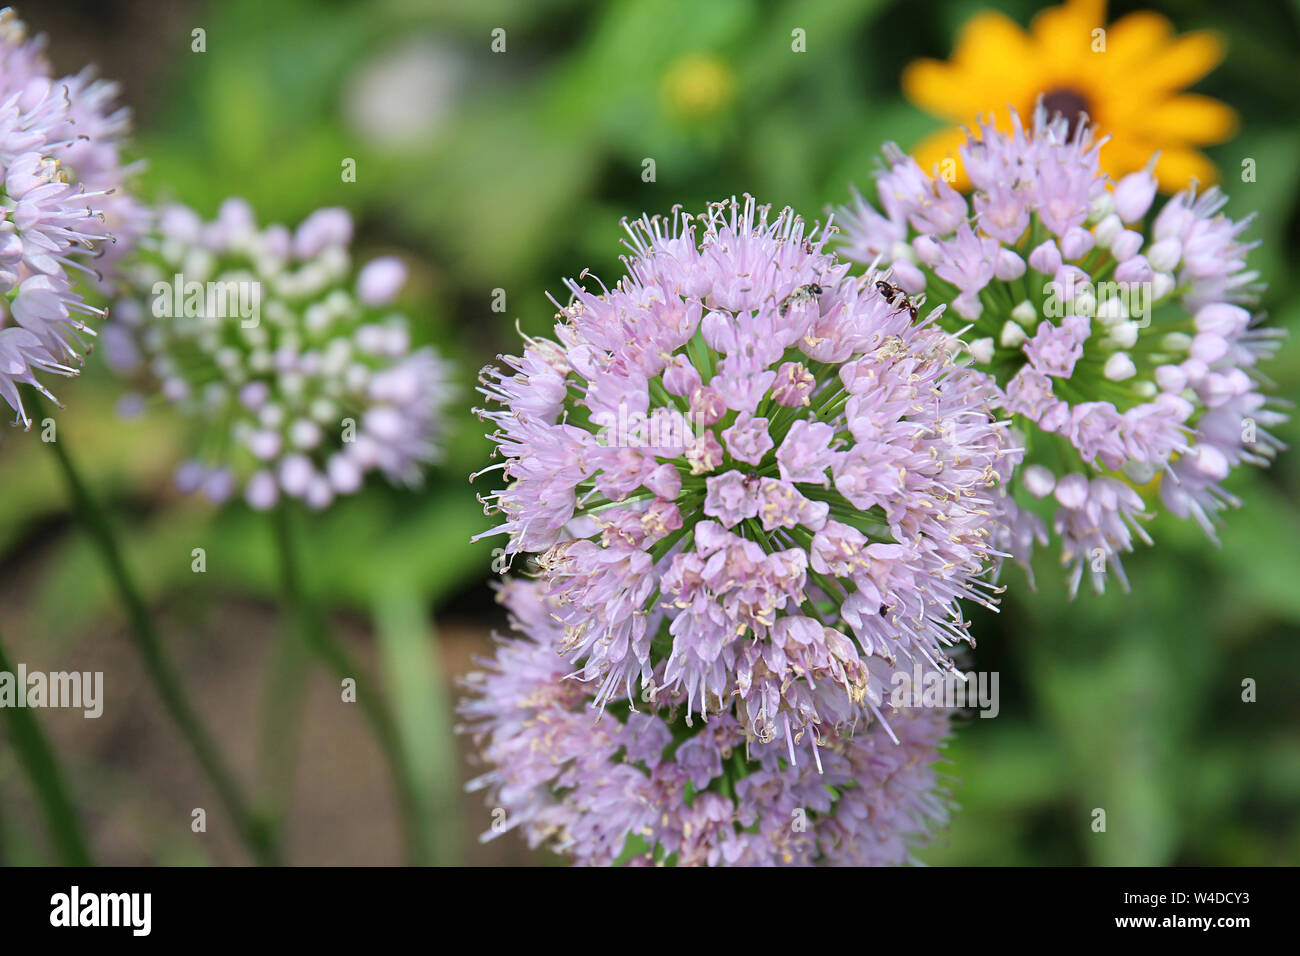 Close up of Pink Moon Allium flowers with ants crawling on the flowers using soft focus and a blurred background Stock Photo